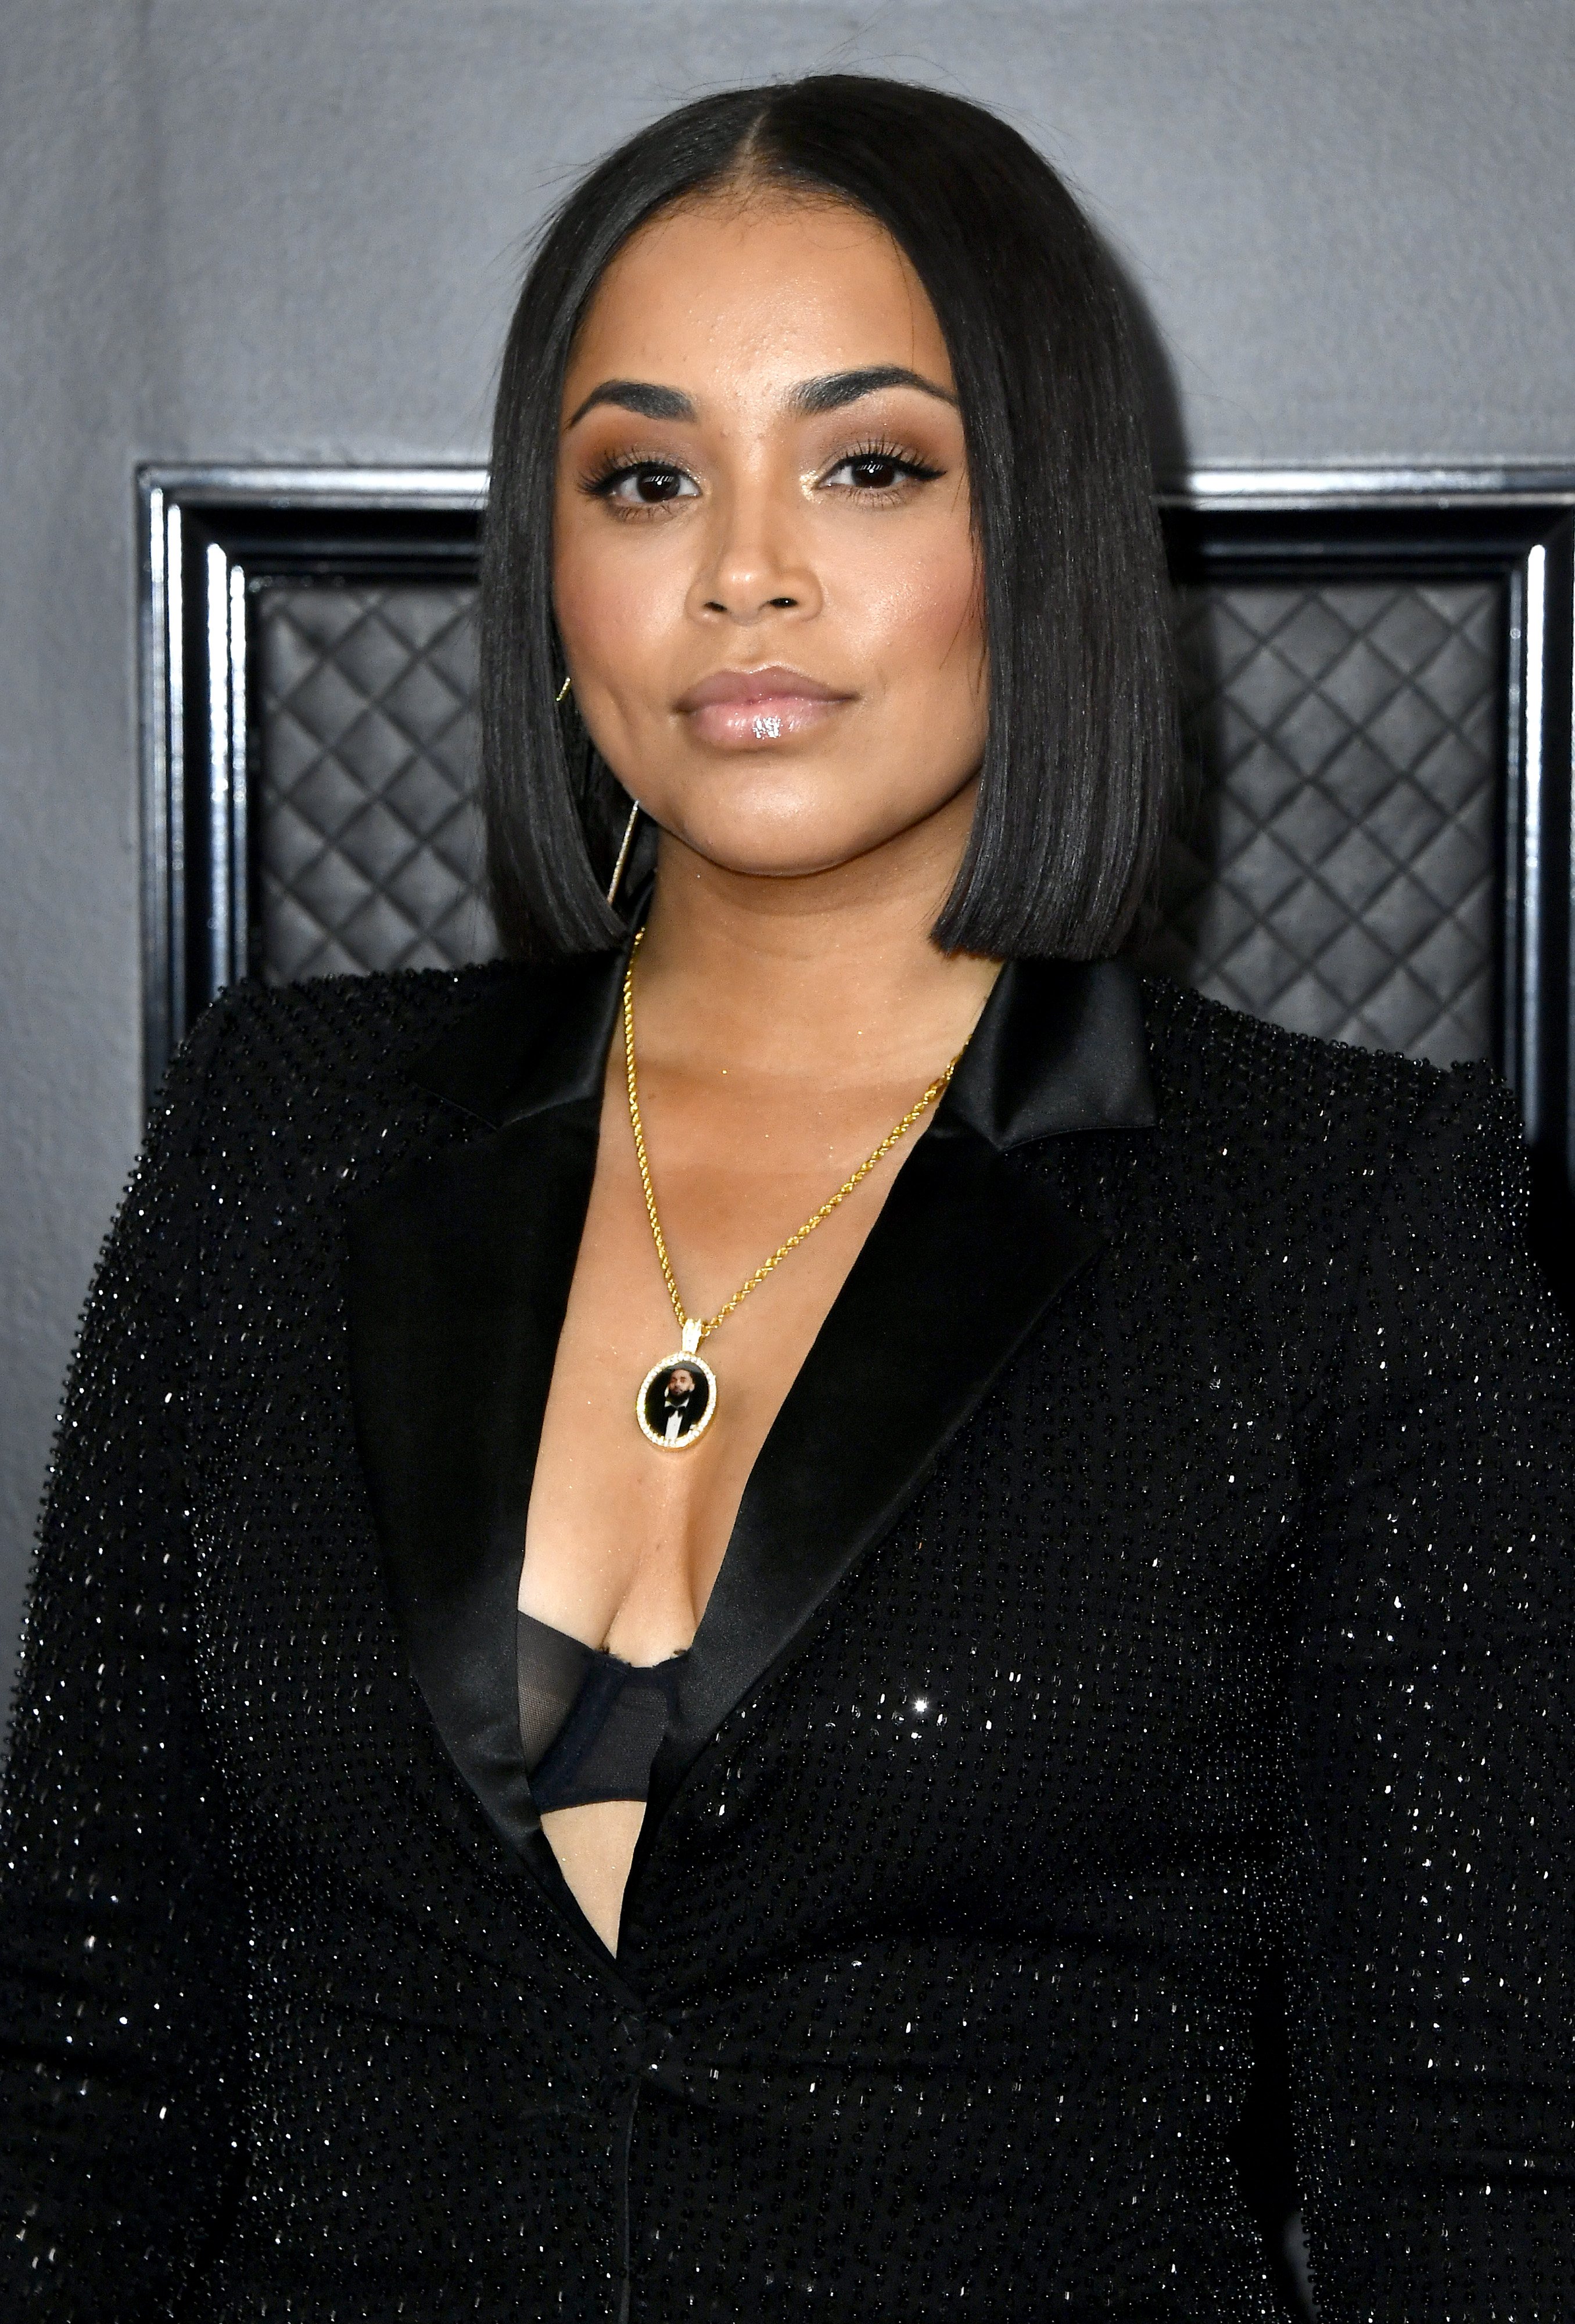 Lauren London stuns at the 62nd Annual Grammy Awards at Staples Center on January 26, 2020 in Los Angeles, California.|Source: Getty Images